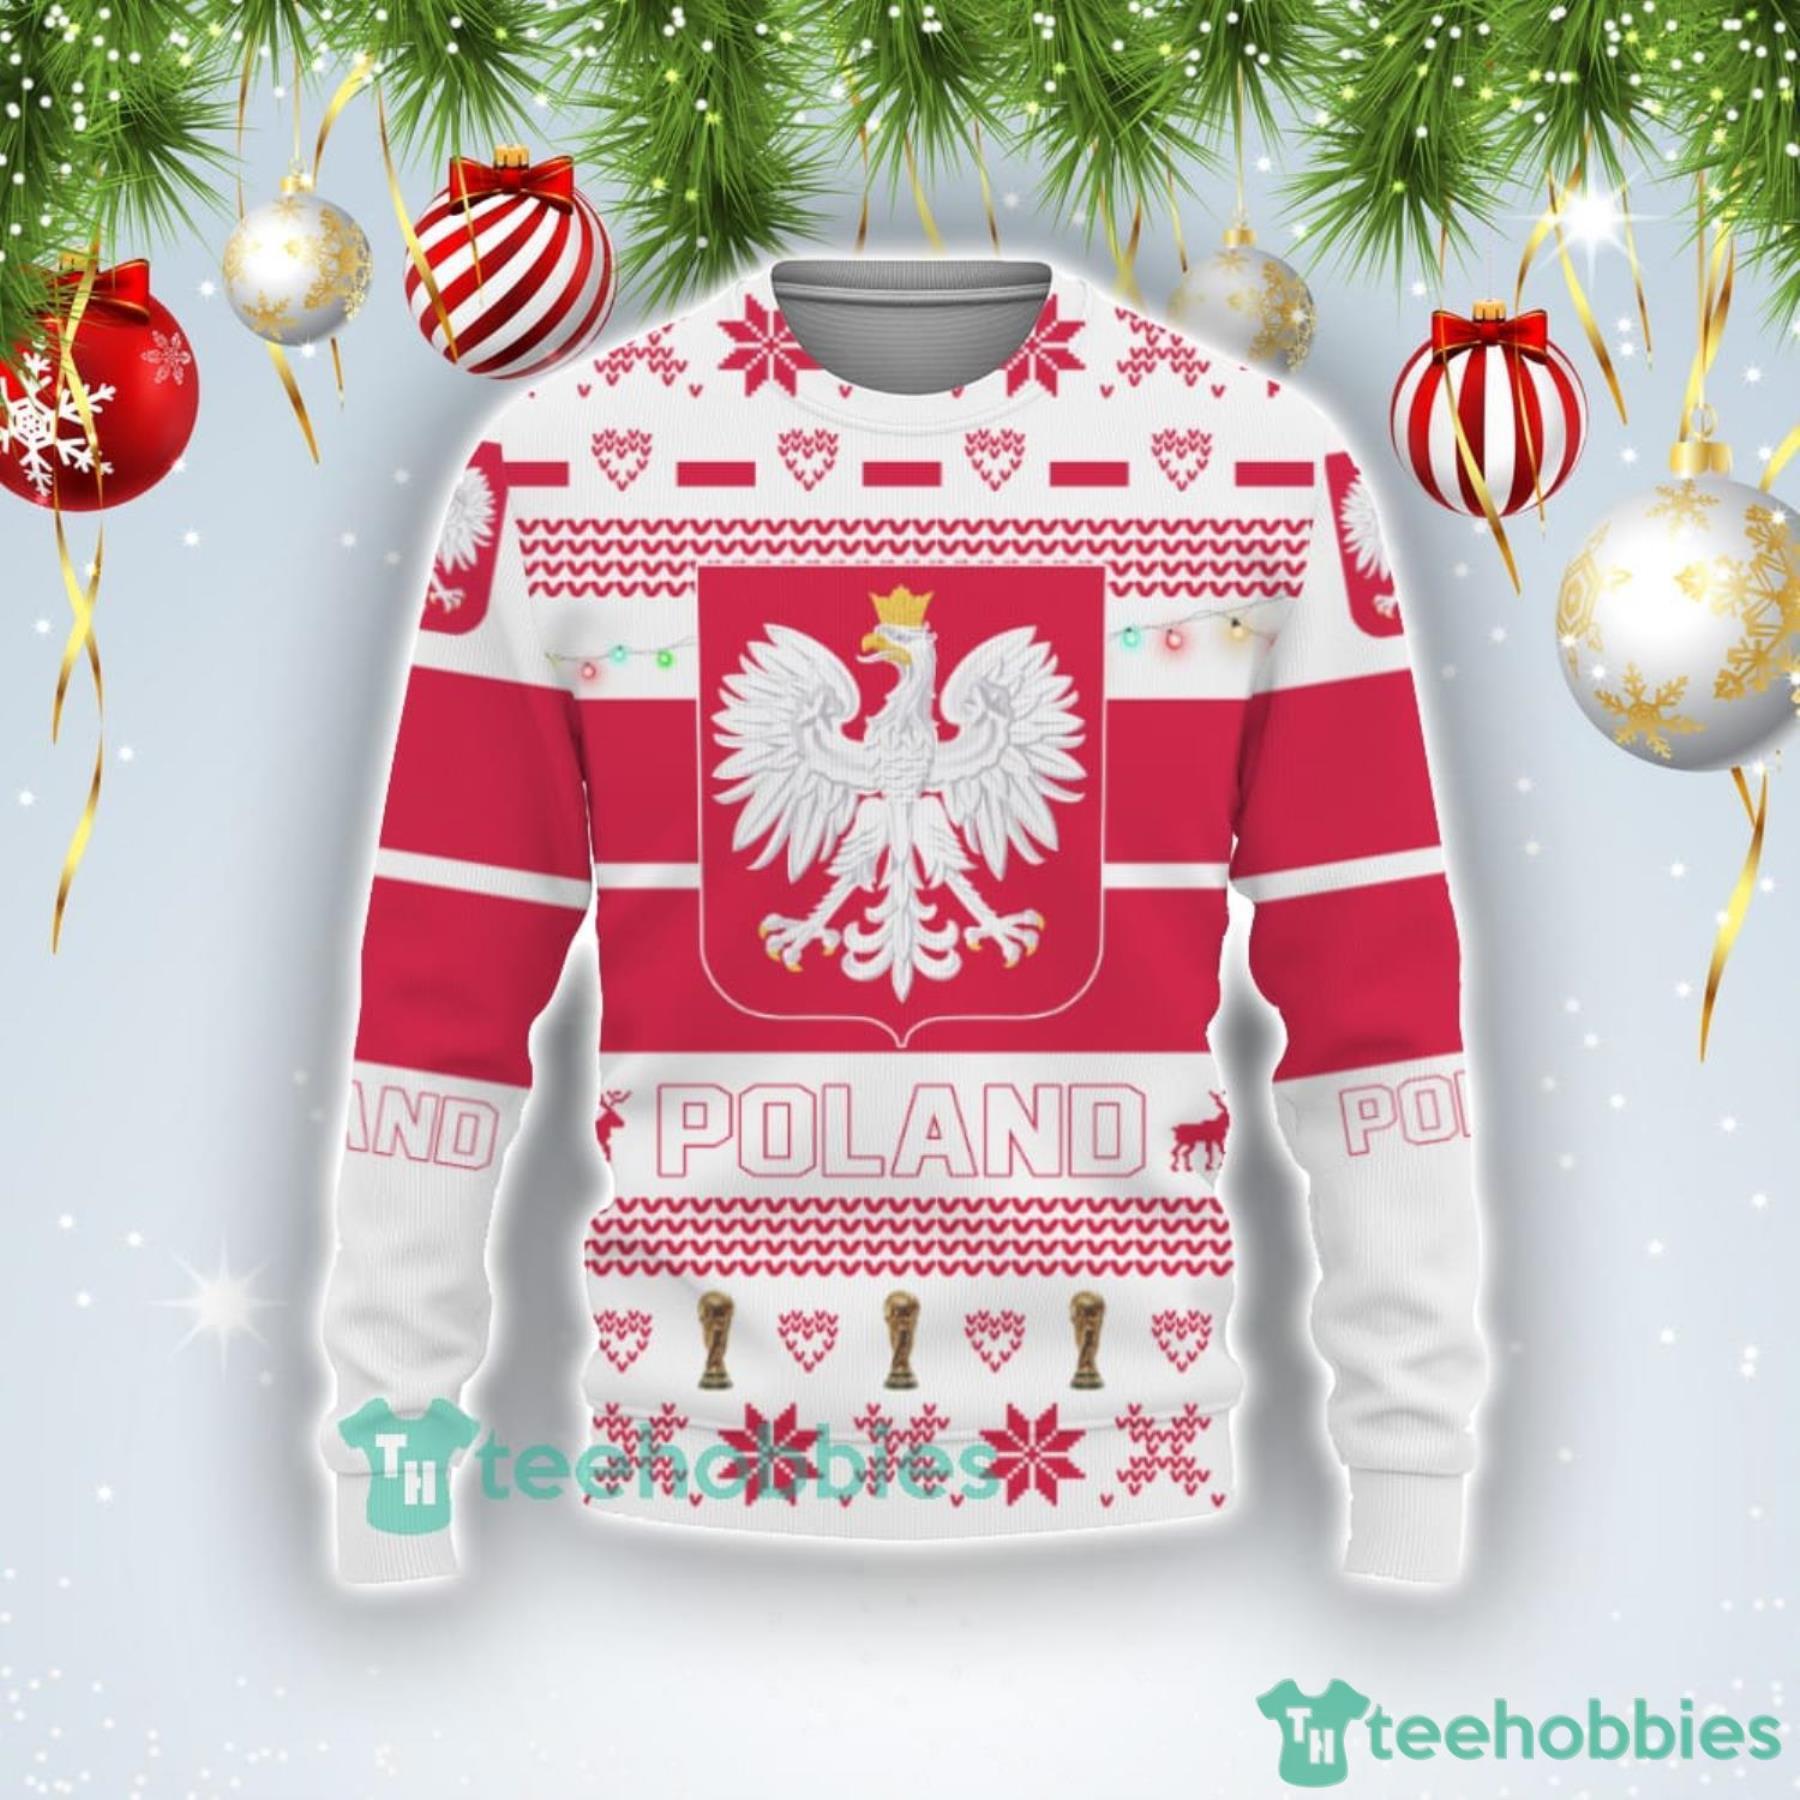 Poland National Team Qatar World Cup 2022 Merry Christmas Ugly Christmas Sweater Product Photo 1